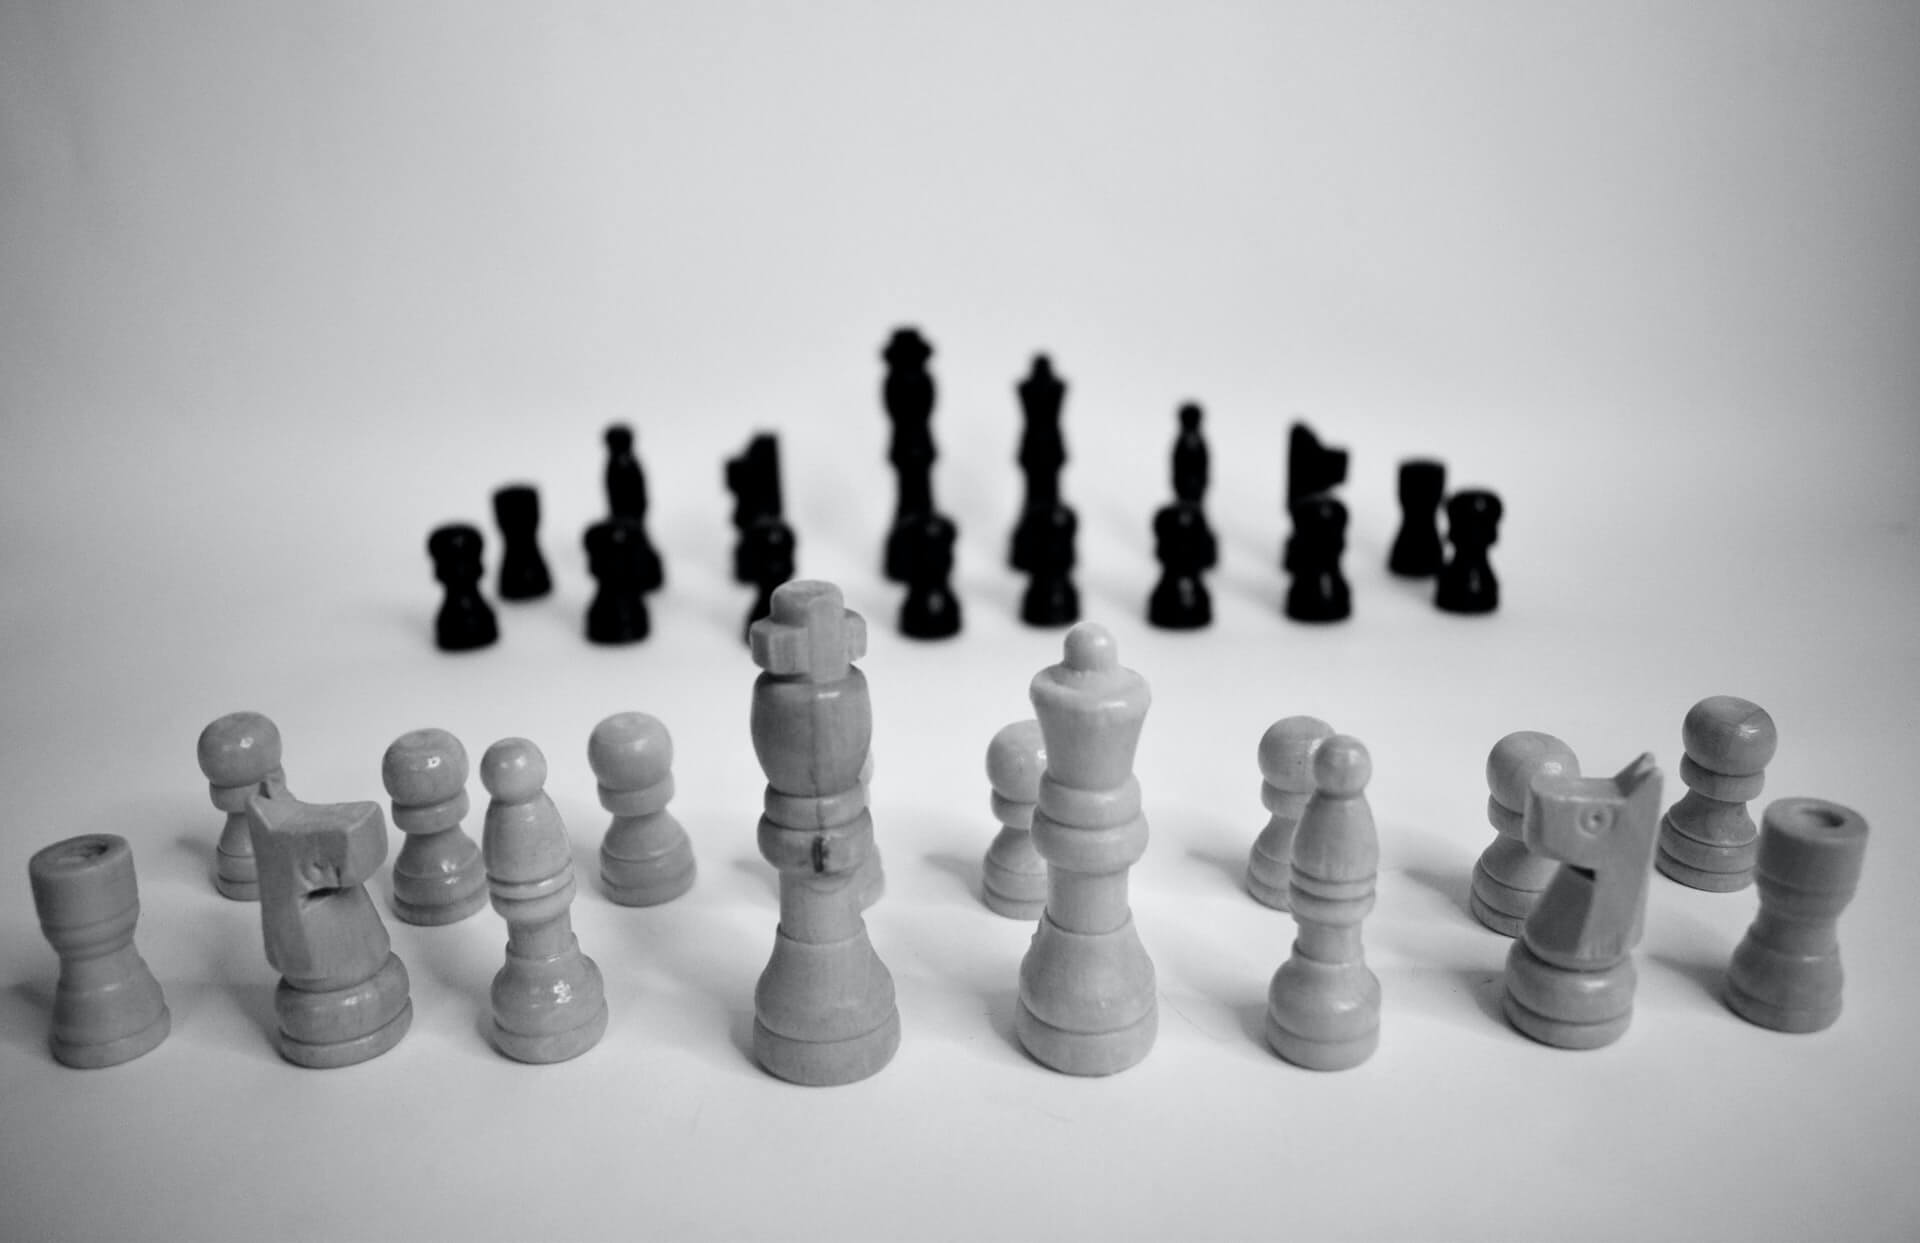 White and black chess pieces on a grey surface